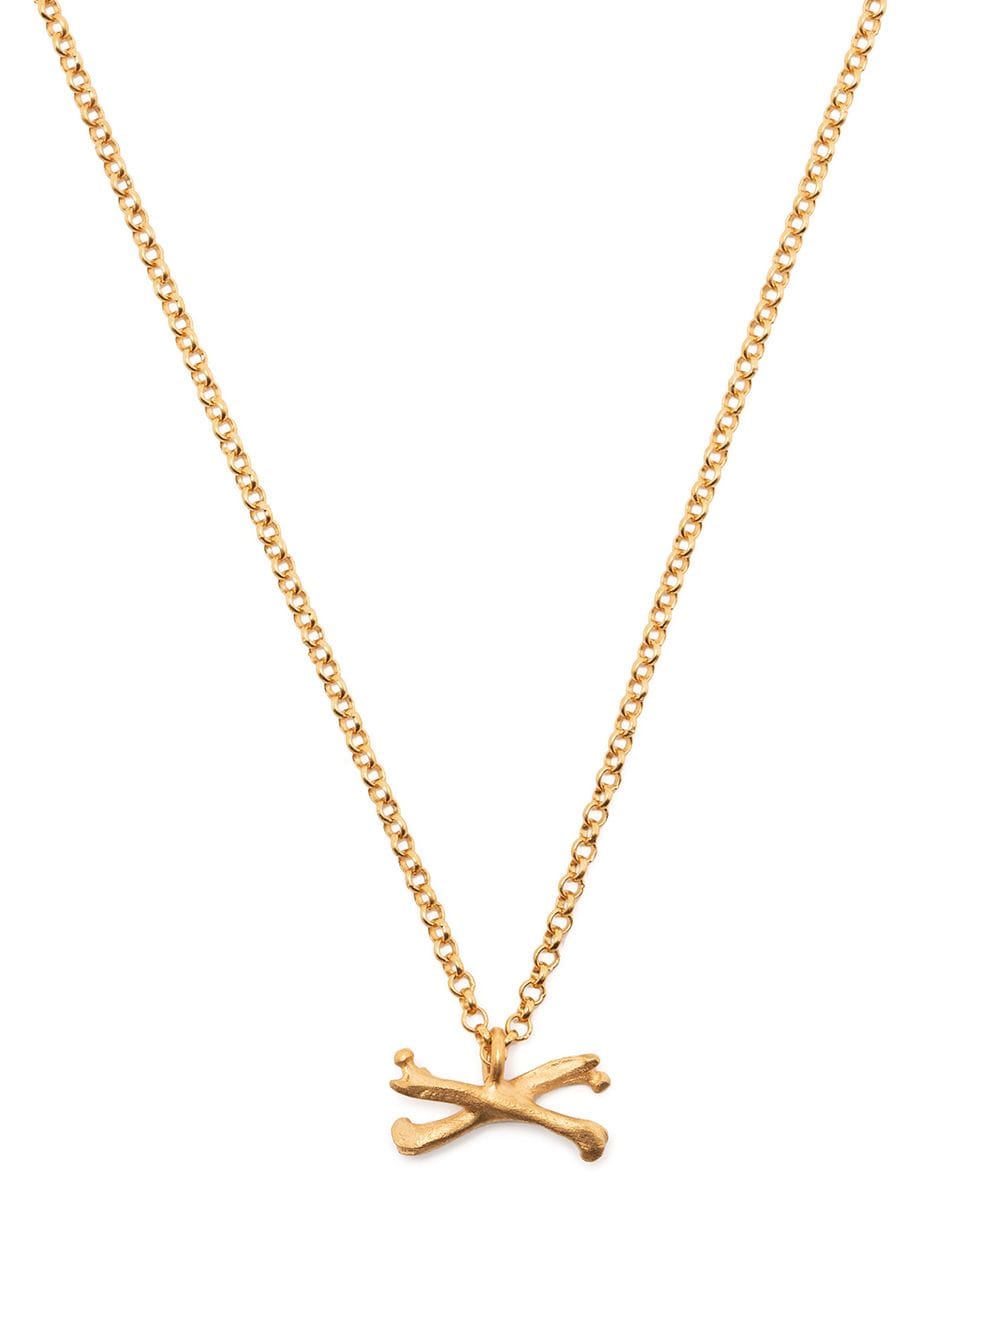 Claire English memento buccaneer gold-plated necklace